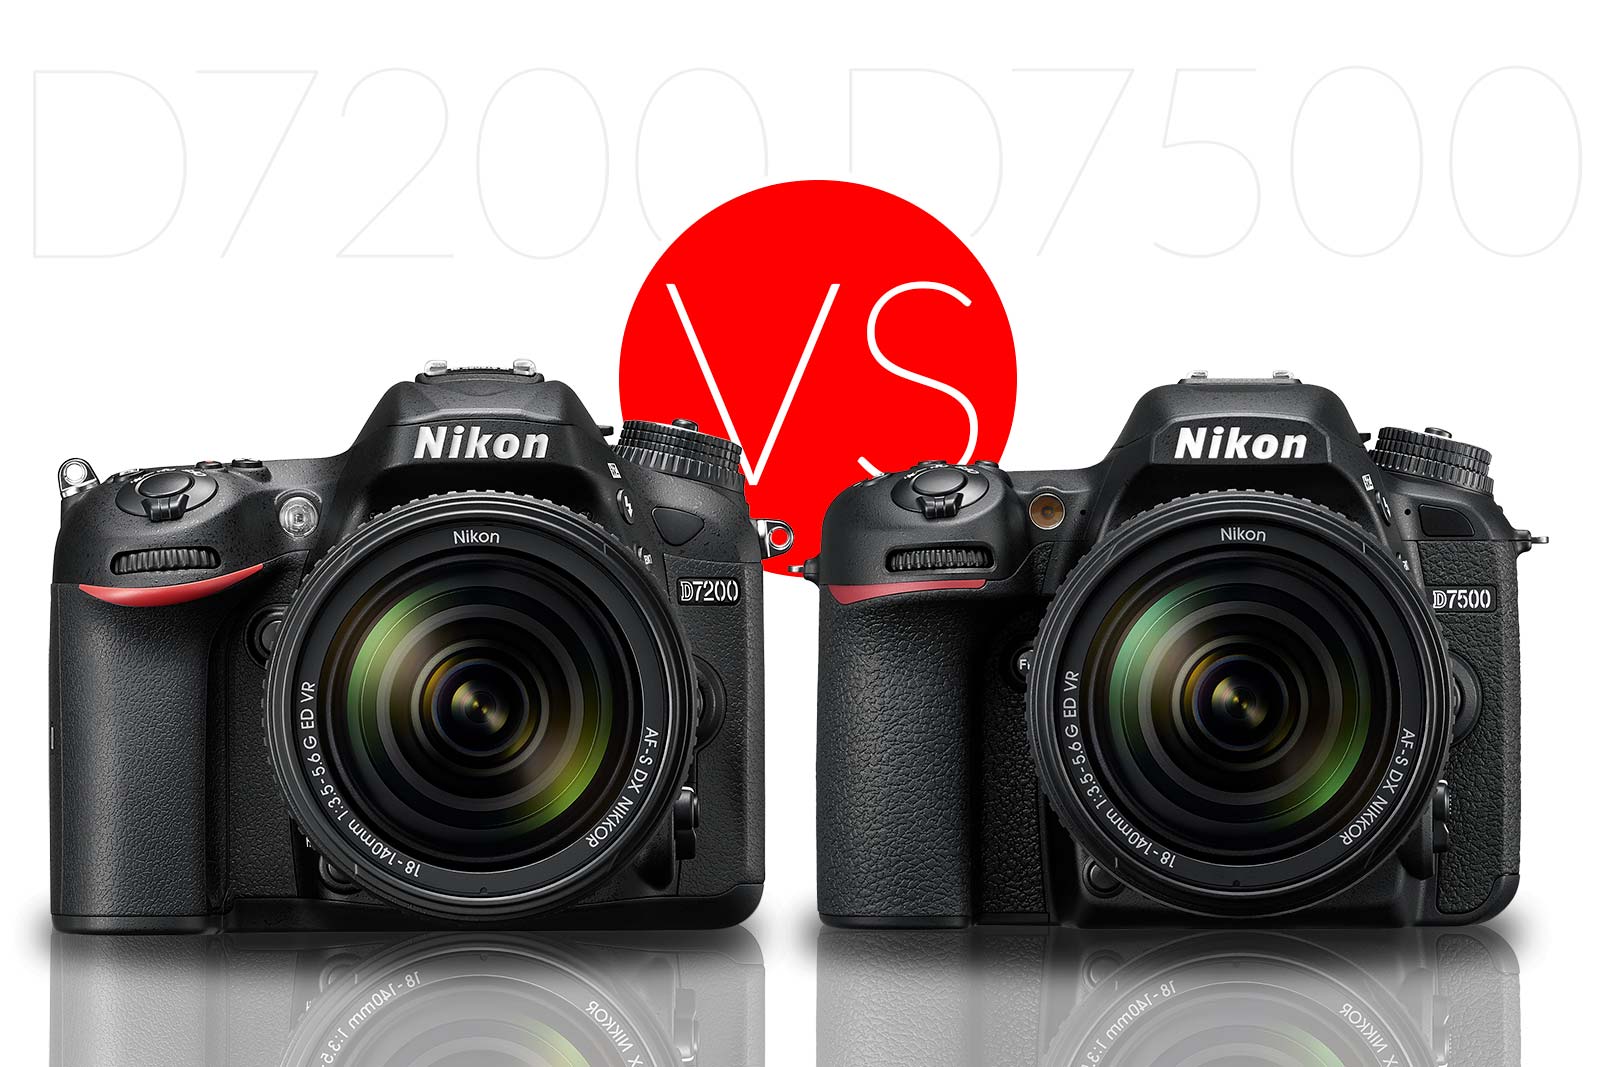 Niet genoeg Aap weerstand Nikon D7500 vs D7200: What's the Difference? - Light And Matter